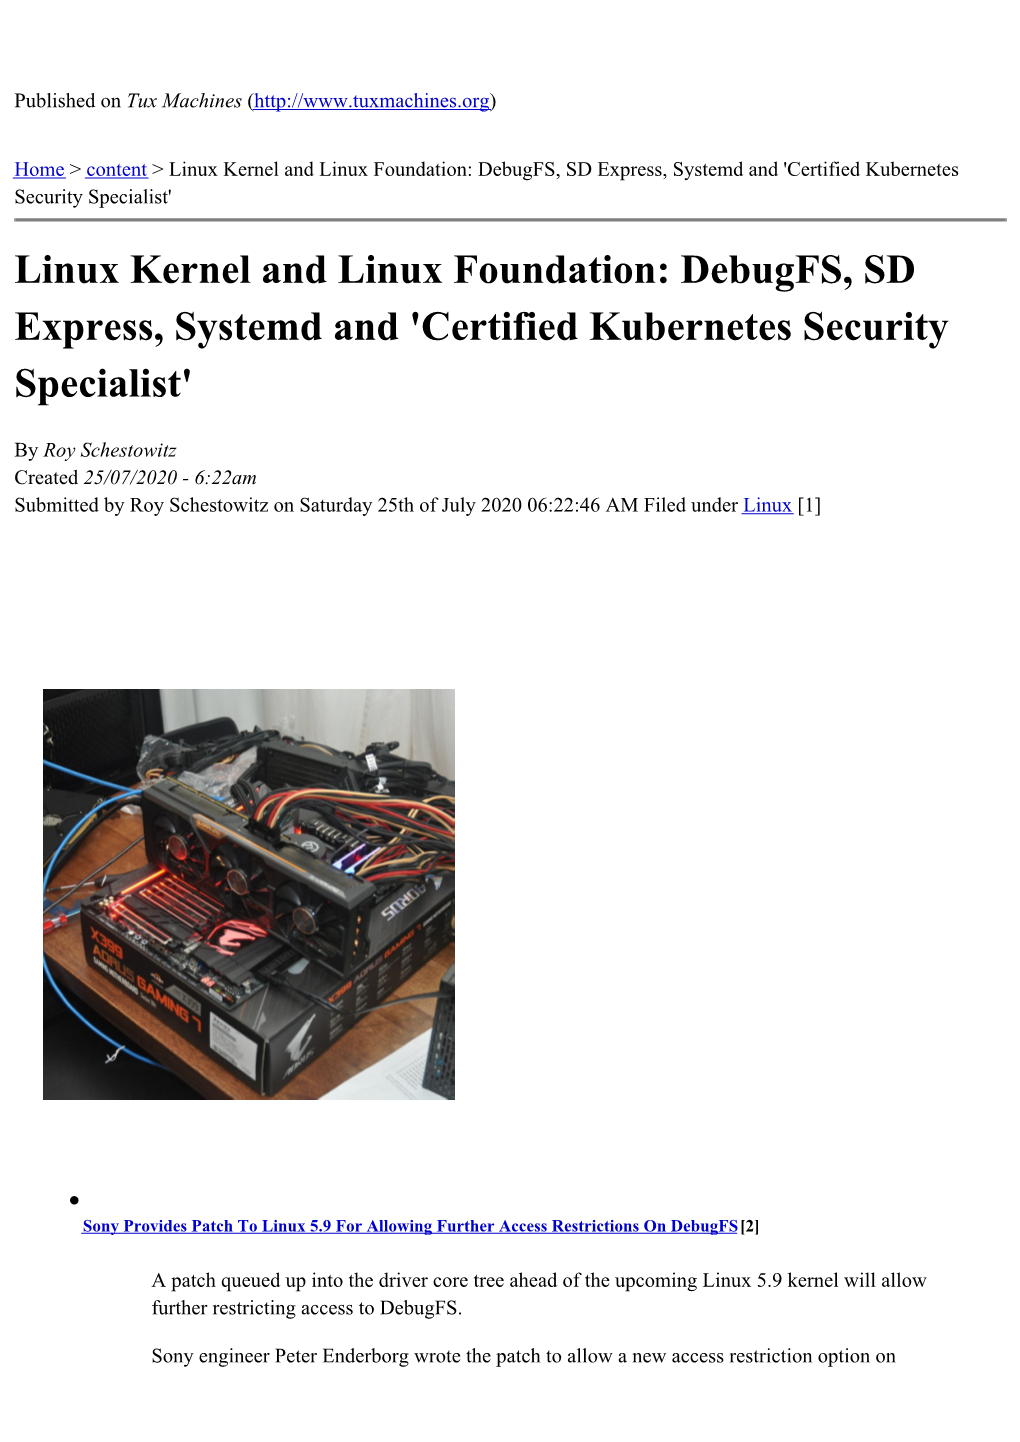 Linux Kernel and Linux Foundation: Debugfs, SD Express, Systemd and 'Certified Kubernetes Security Specialist'